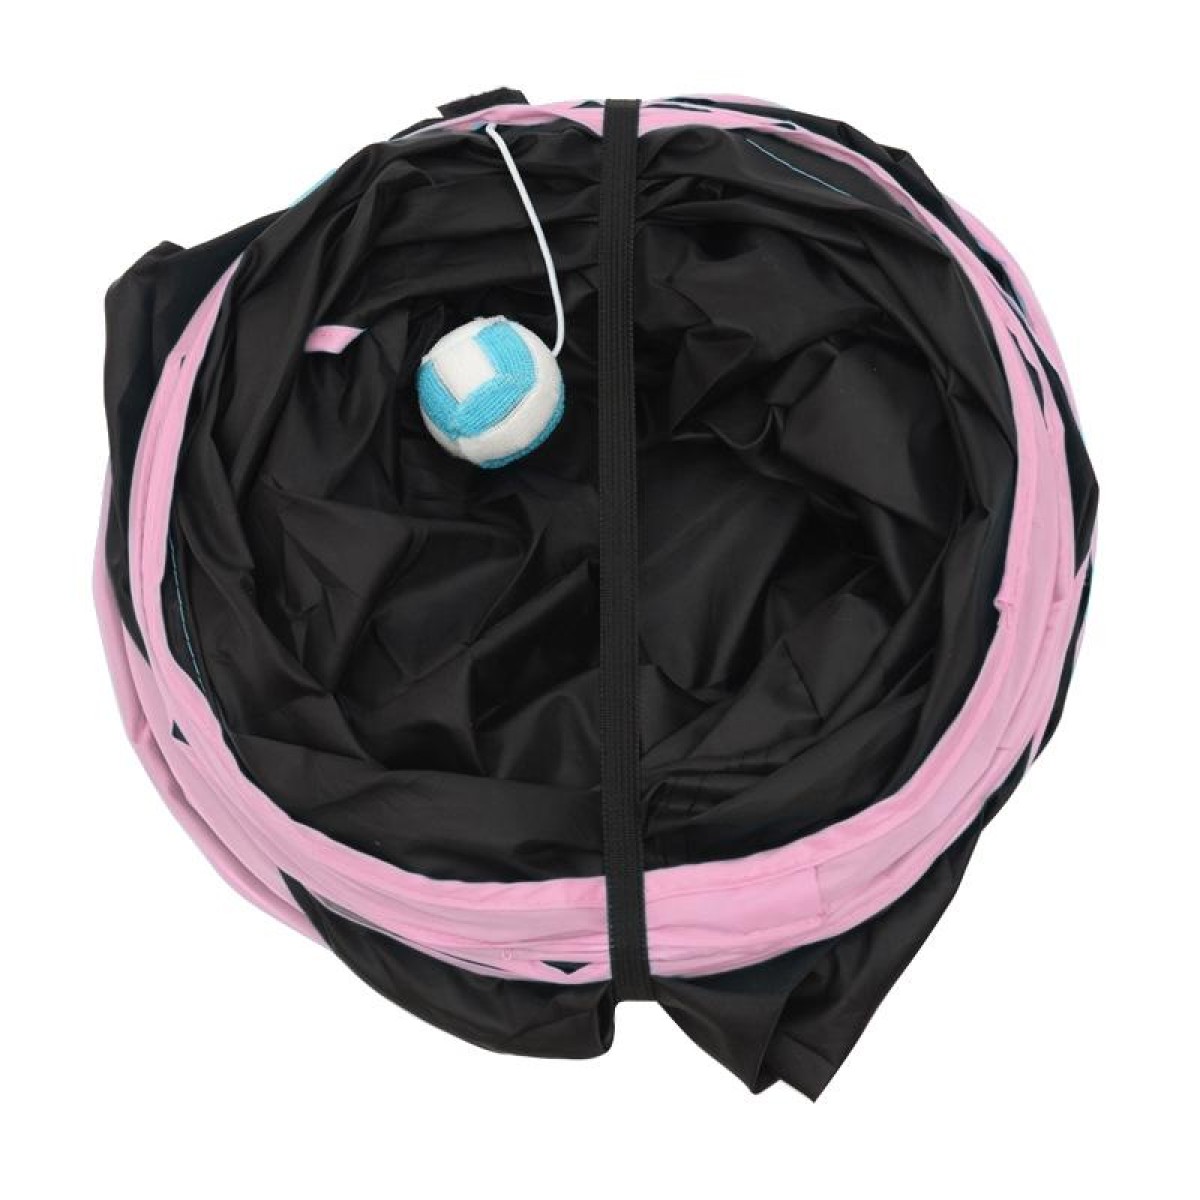 Foldable 3 Exits Exercising Cat Tunnel with A Hanging Ball(Pink)